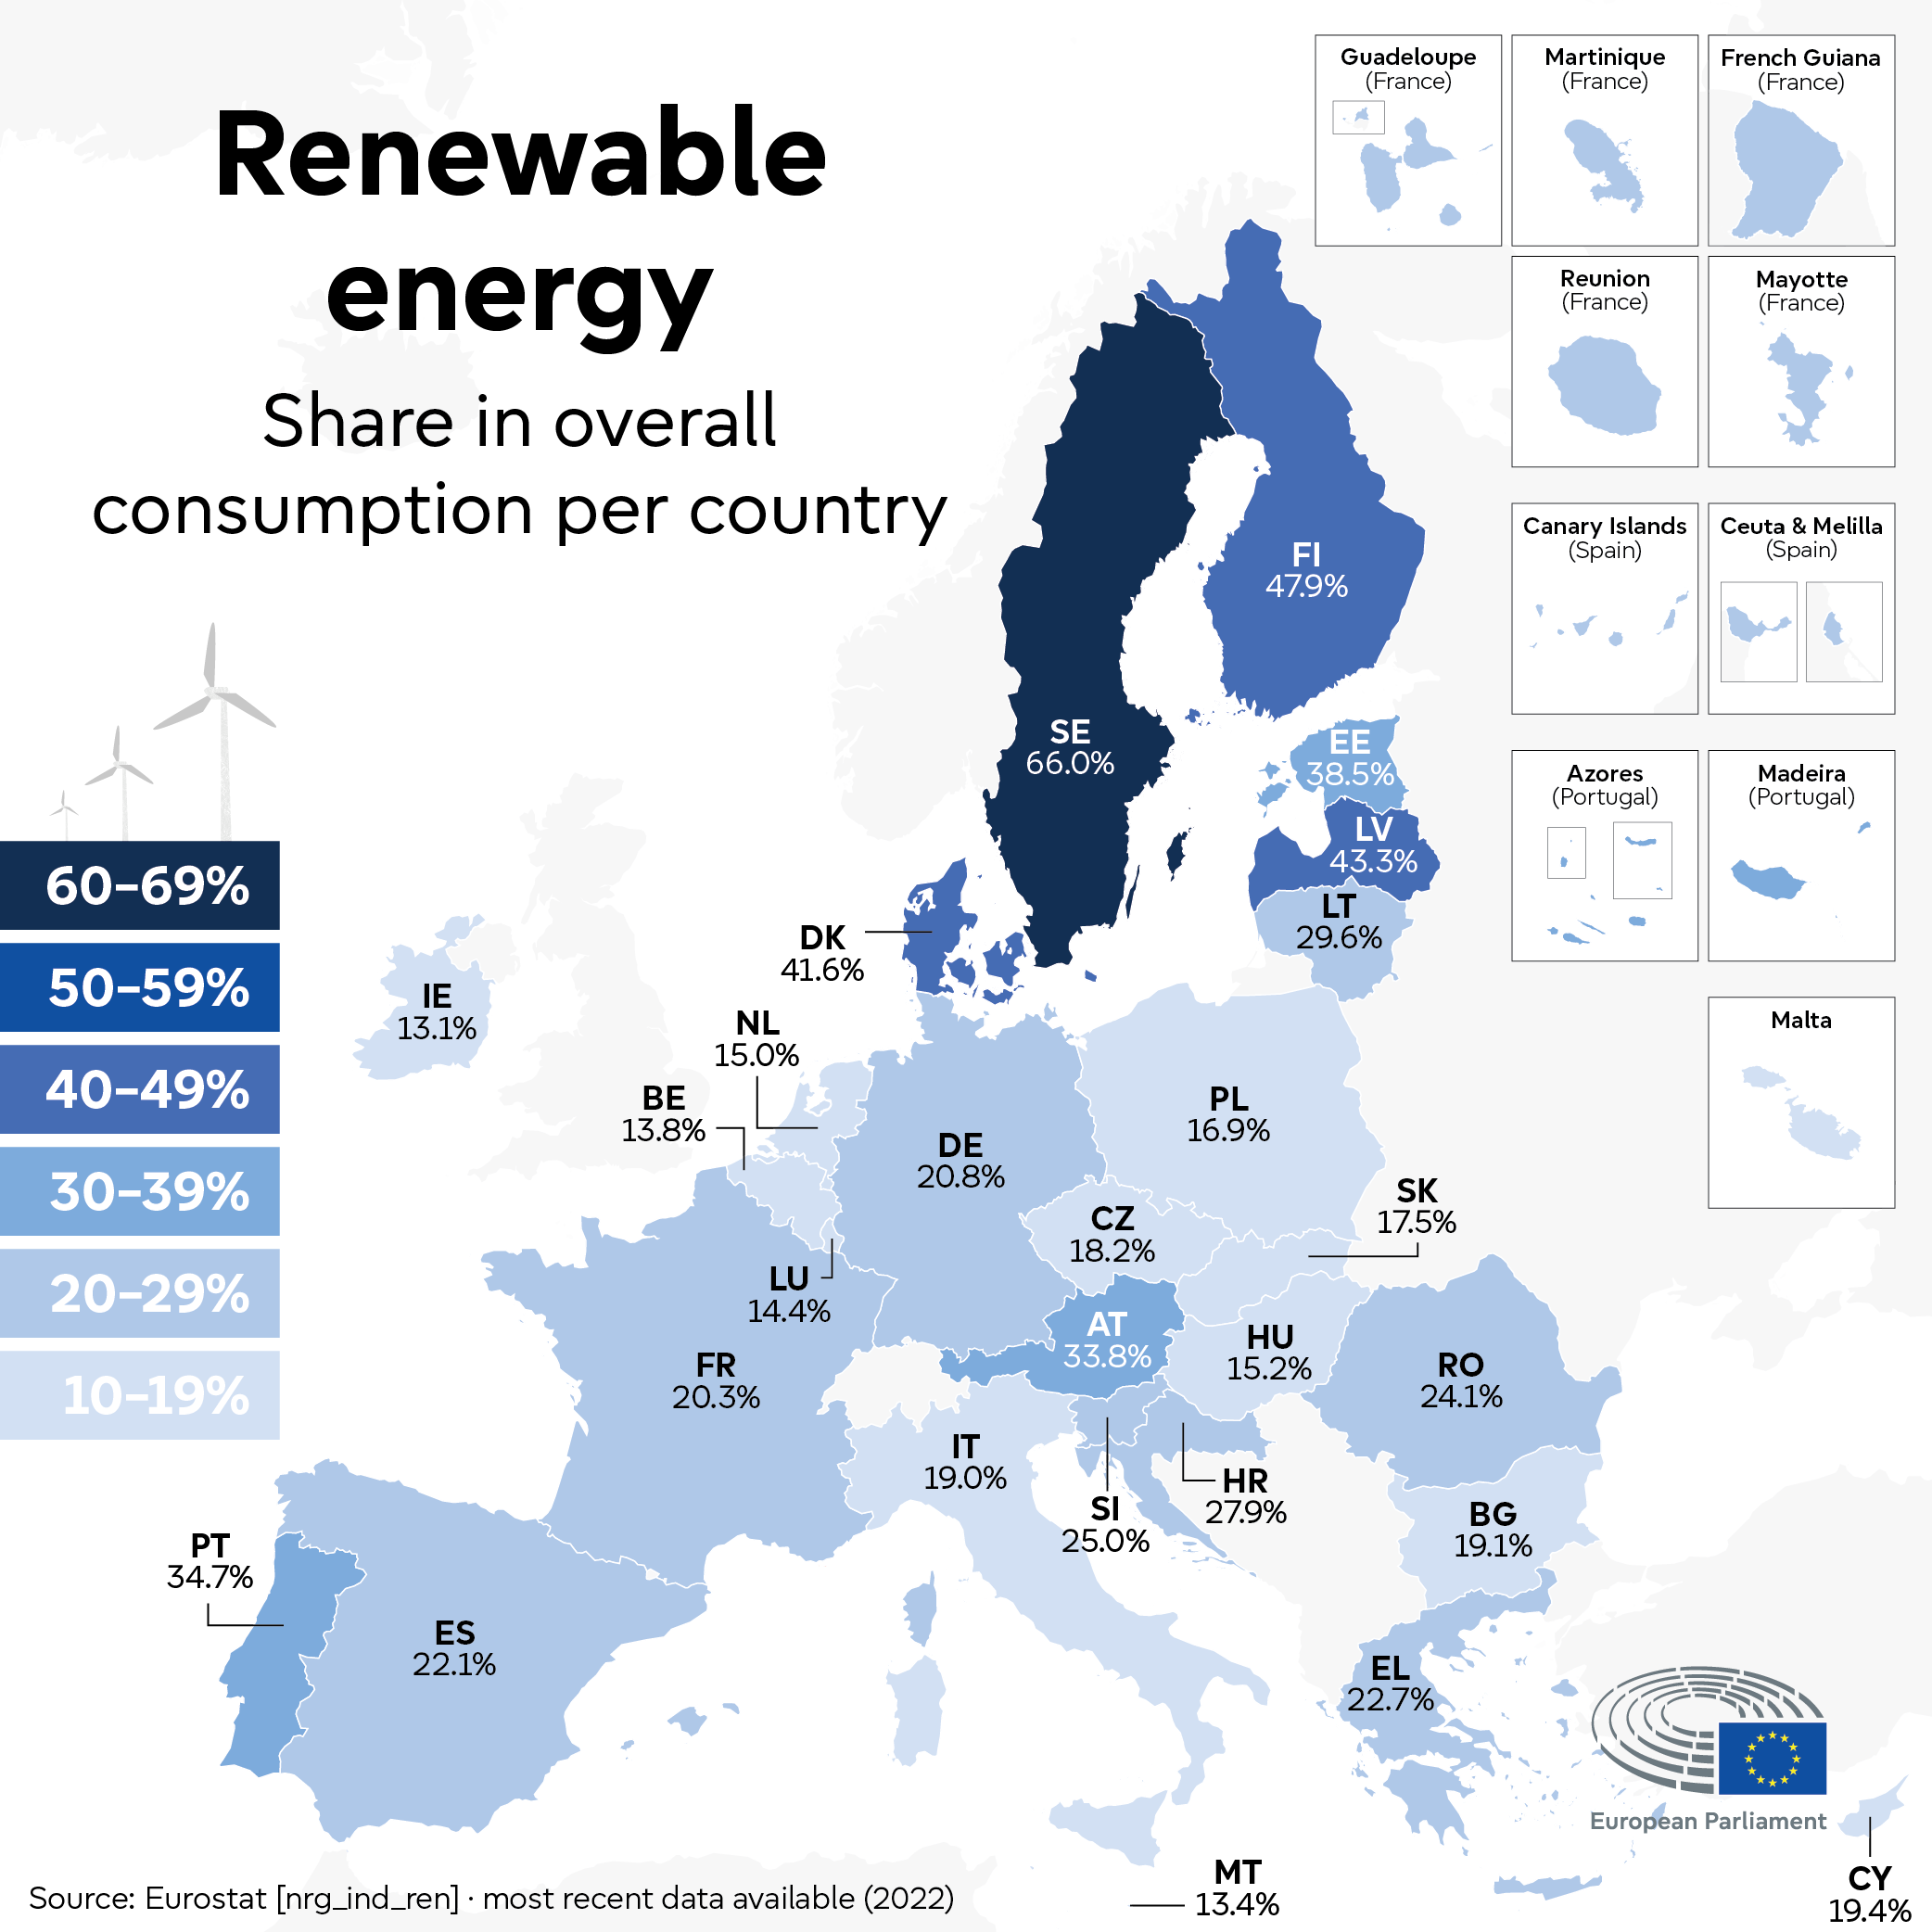 RENEWABLE ENERGY SHARES IN THE EU MEMBER STATES